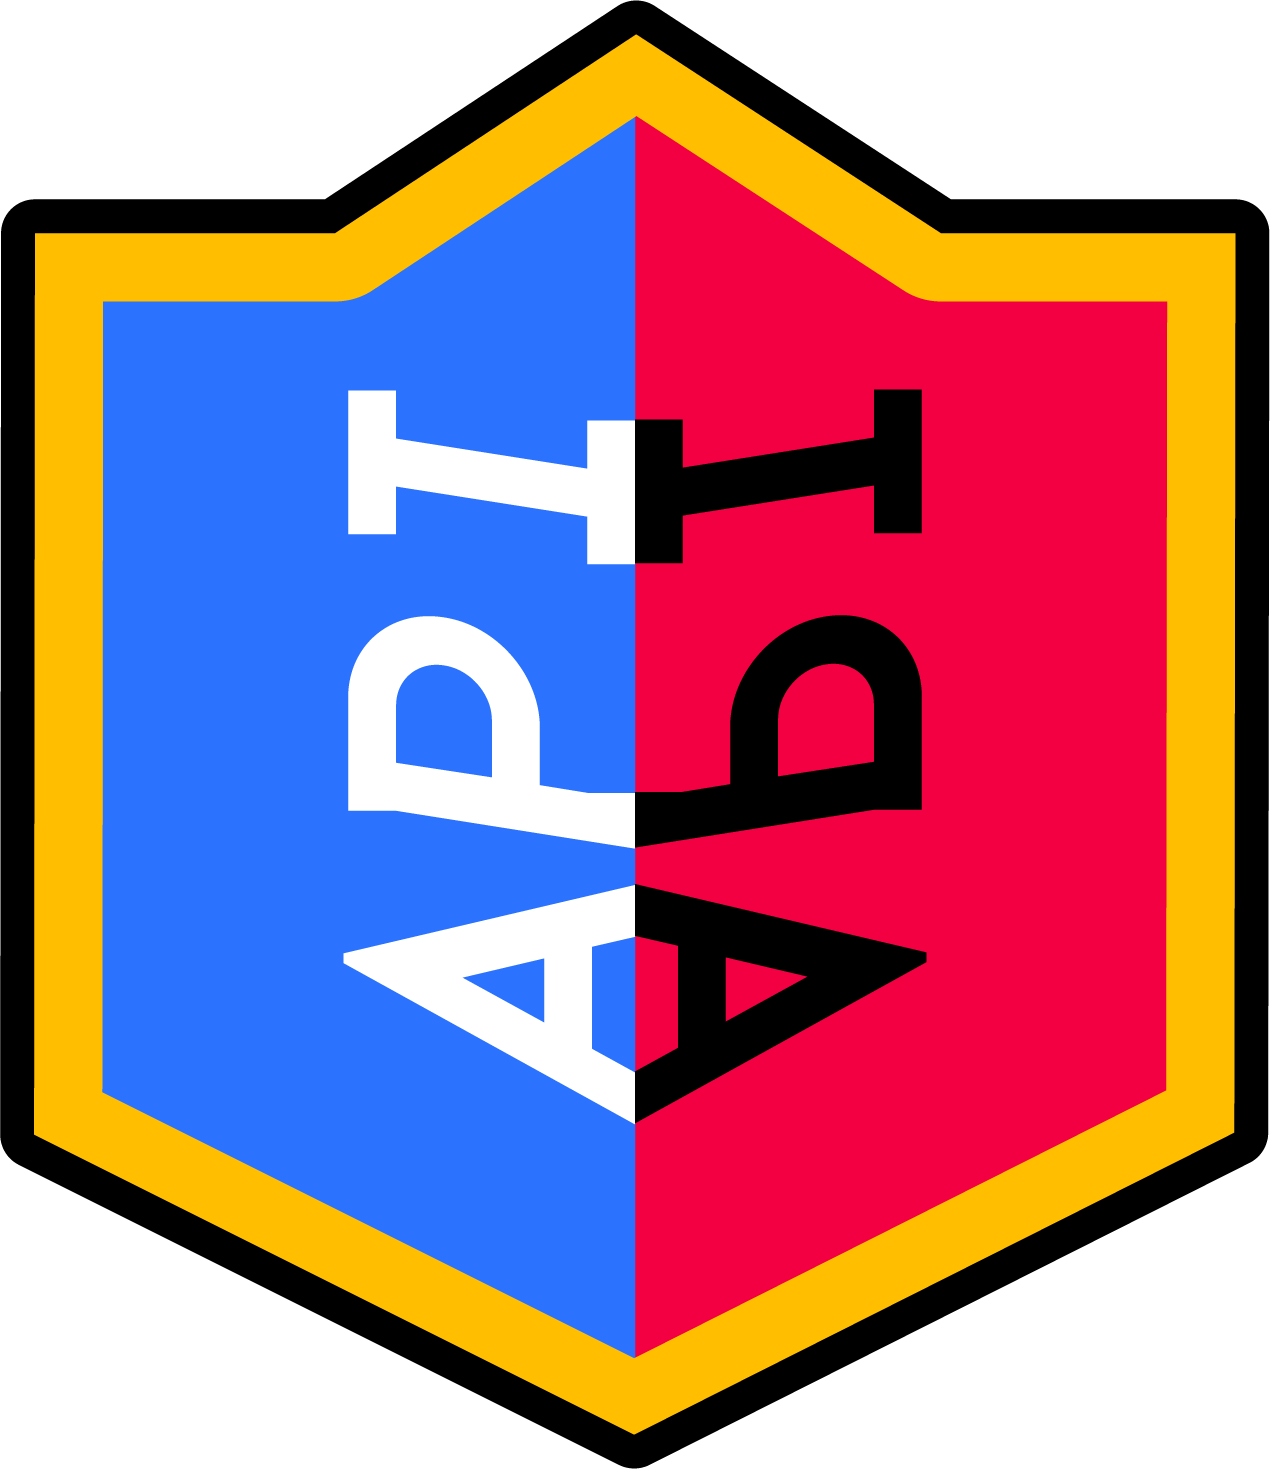 You Can Use Our Api To Access Clash Royale Api Endpoints, - You Can Use Our Api To Access Clash Royale Api Endpoints, (1270x1469)